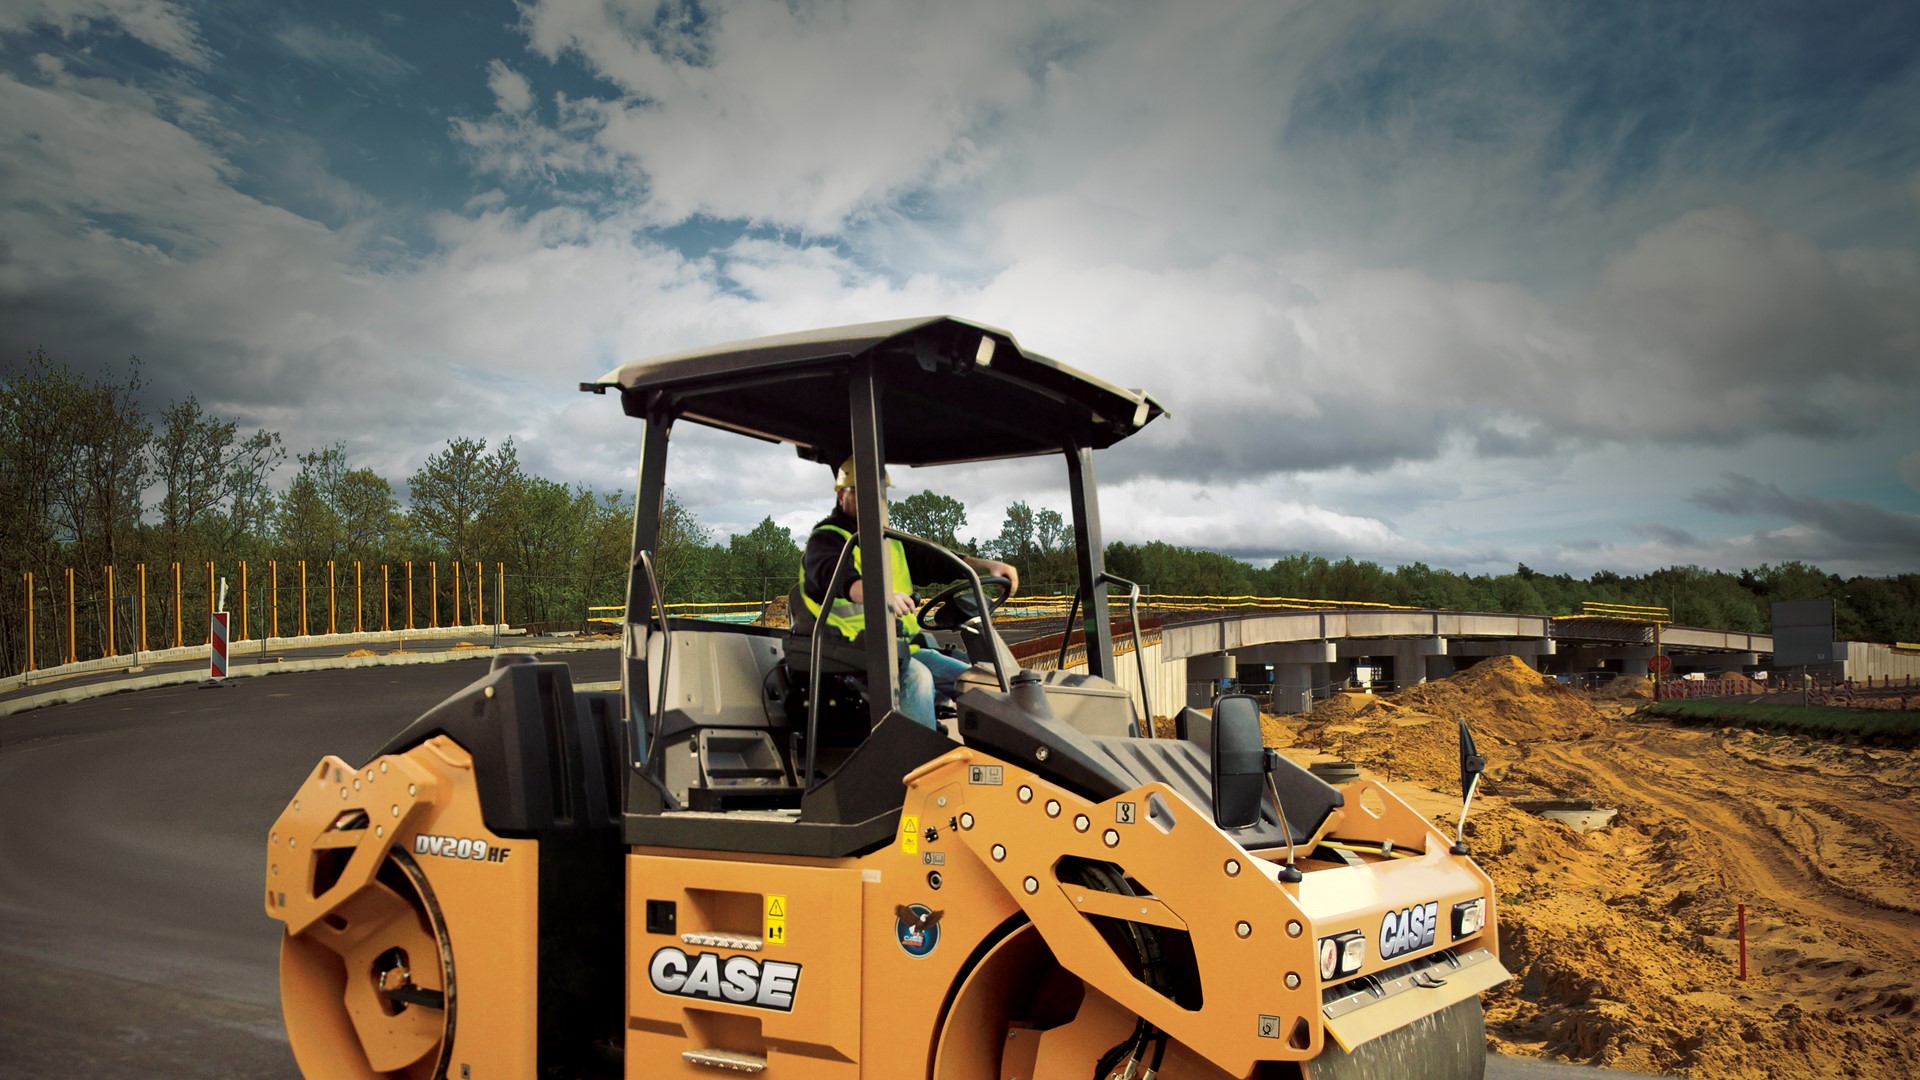 CASE Construction Equipment (Booth 454) will give away one of its Small DV Series rollers at the 2015 NPE